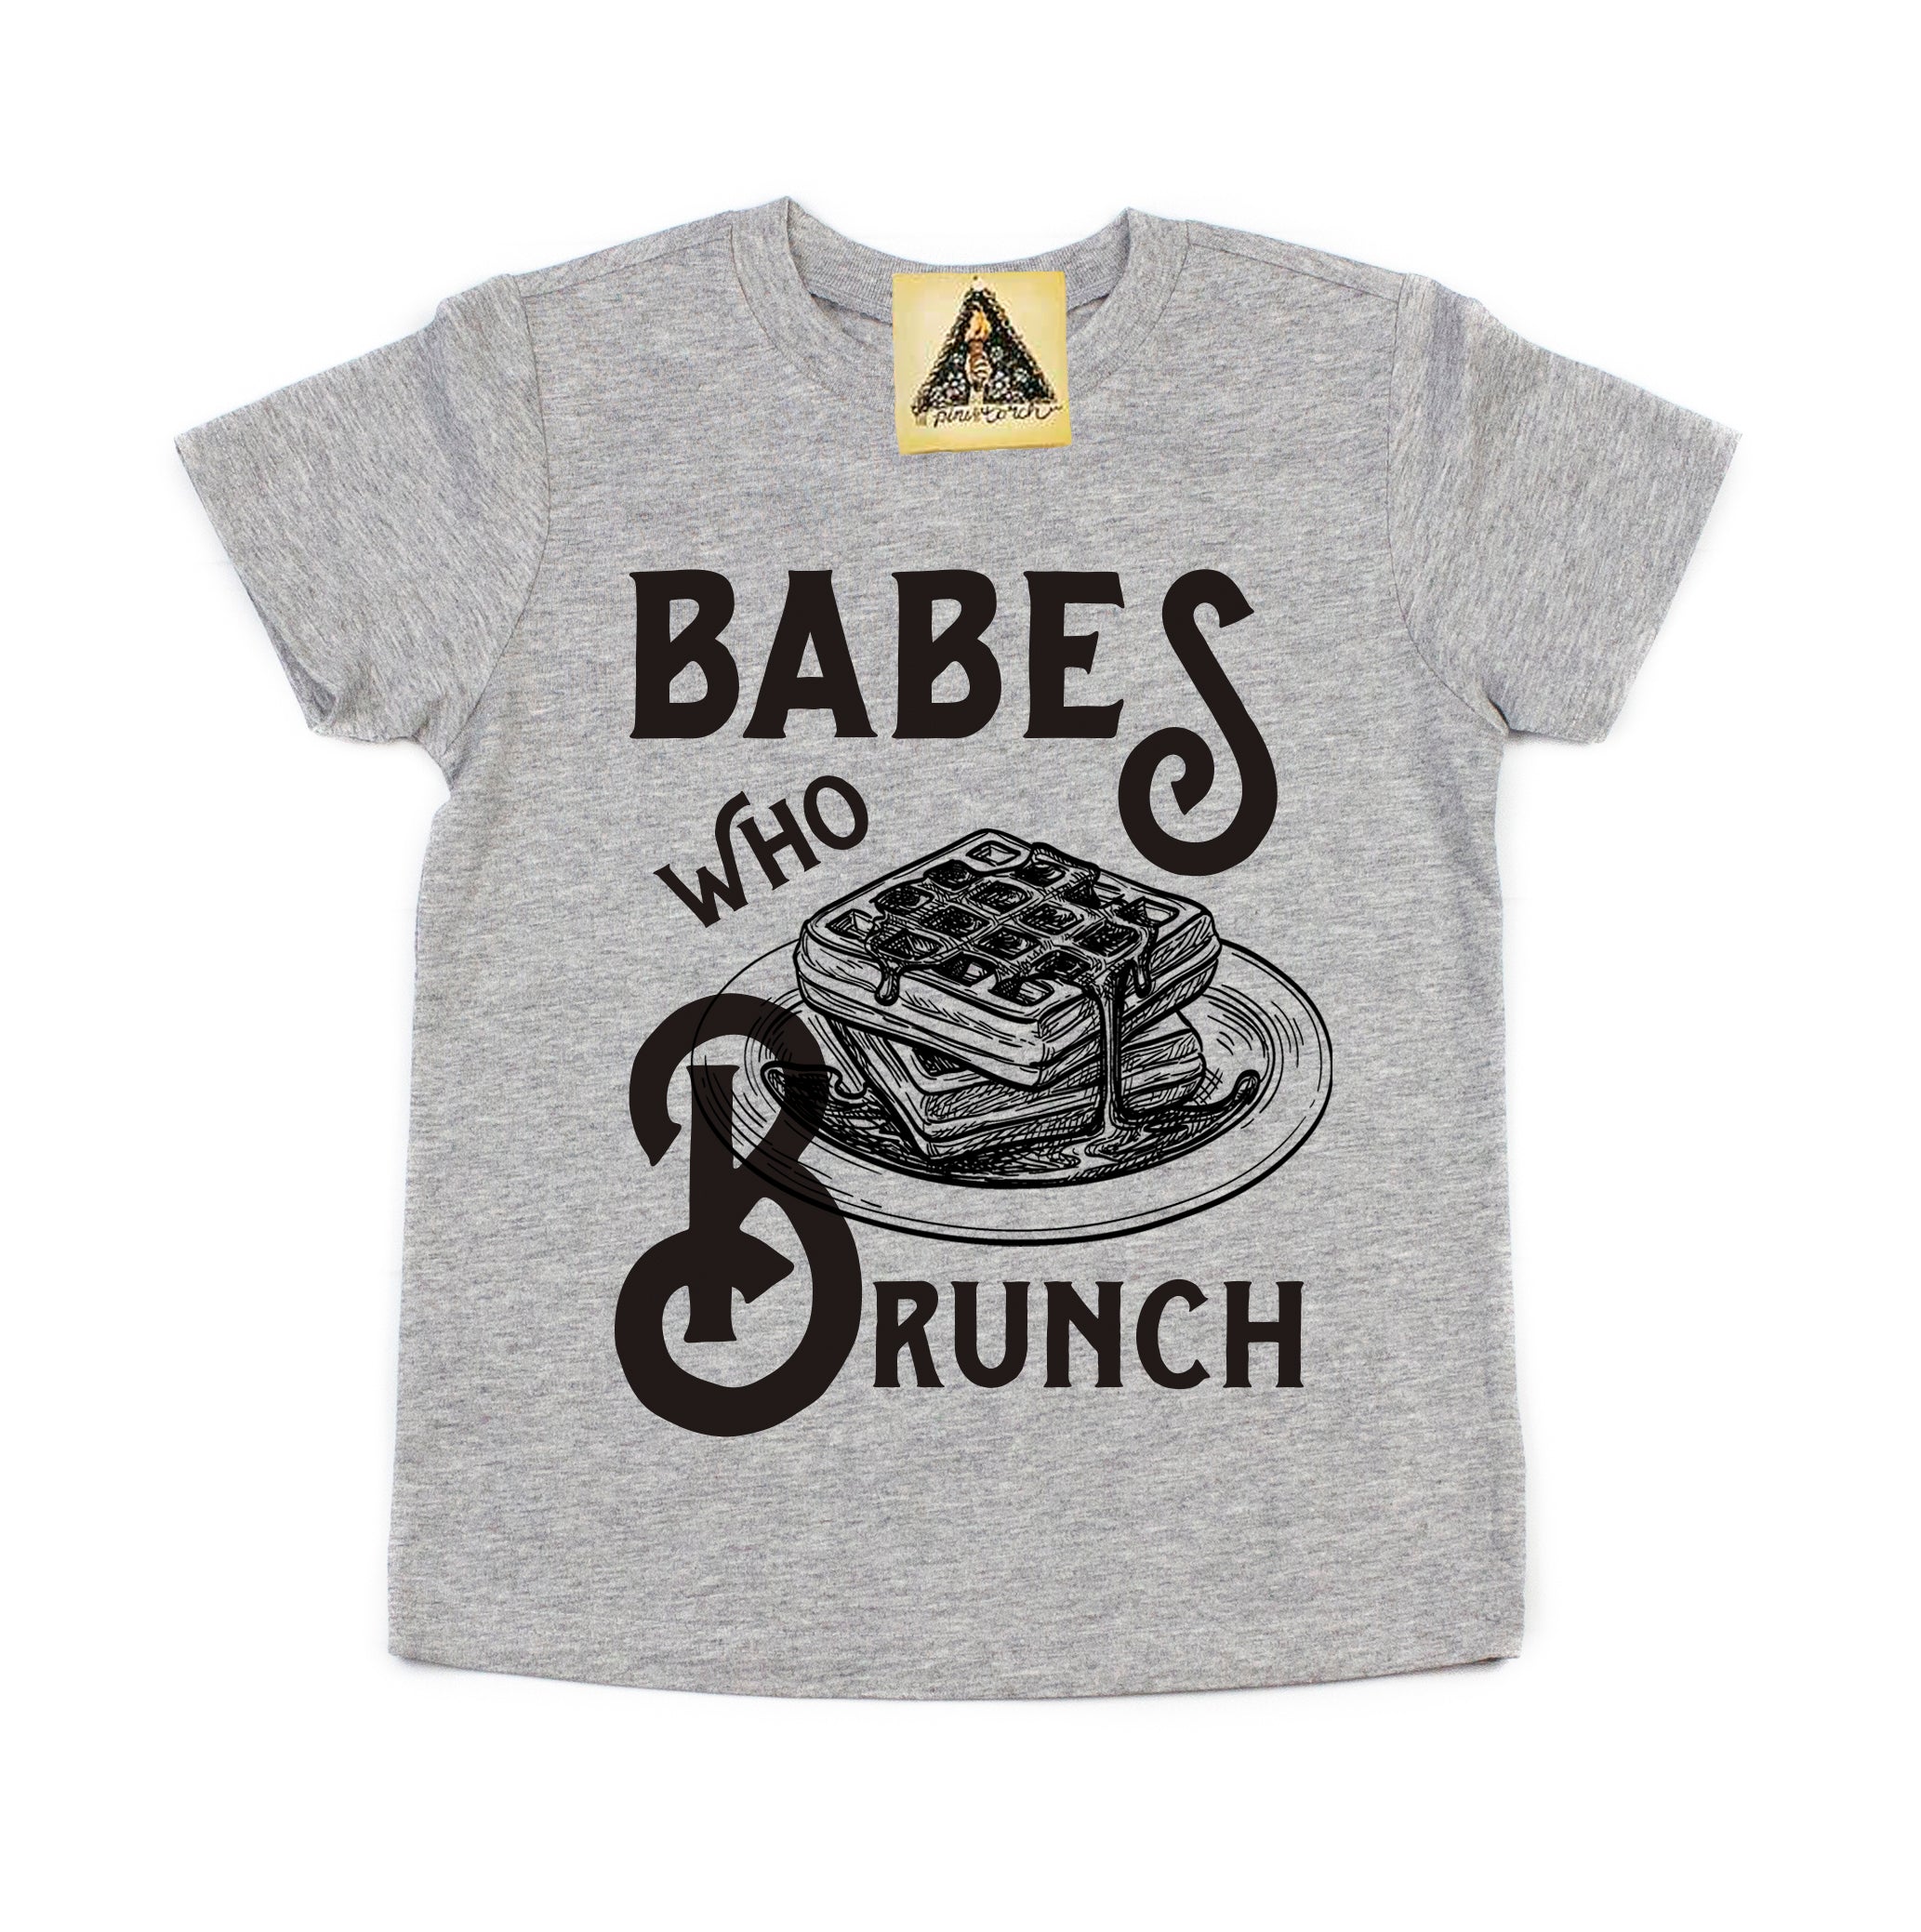 « BABES WHO BRUNCH » KID'S TEE